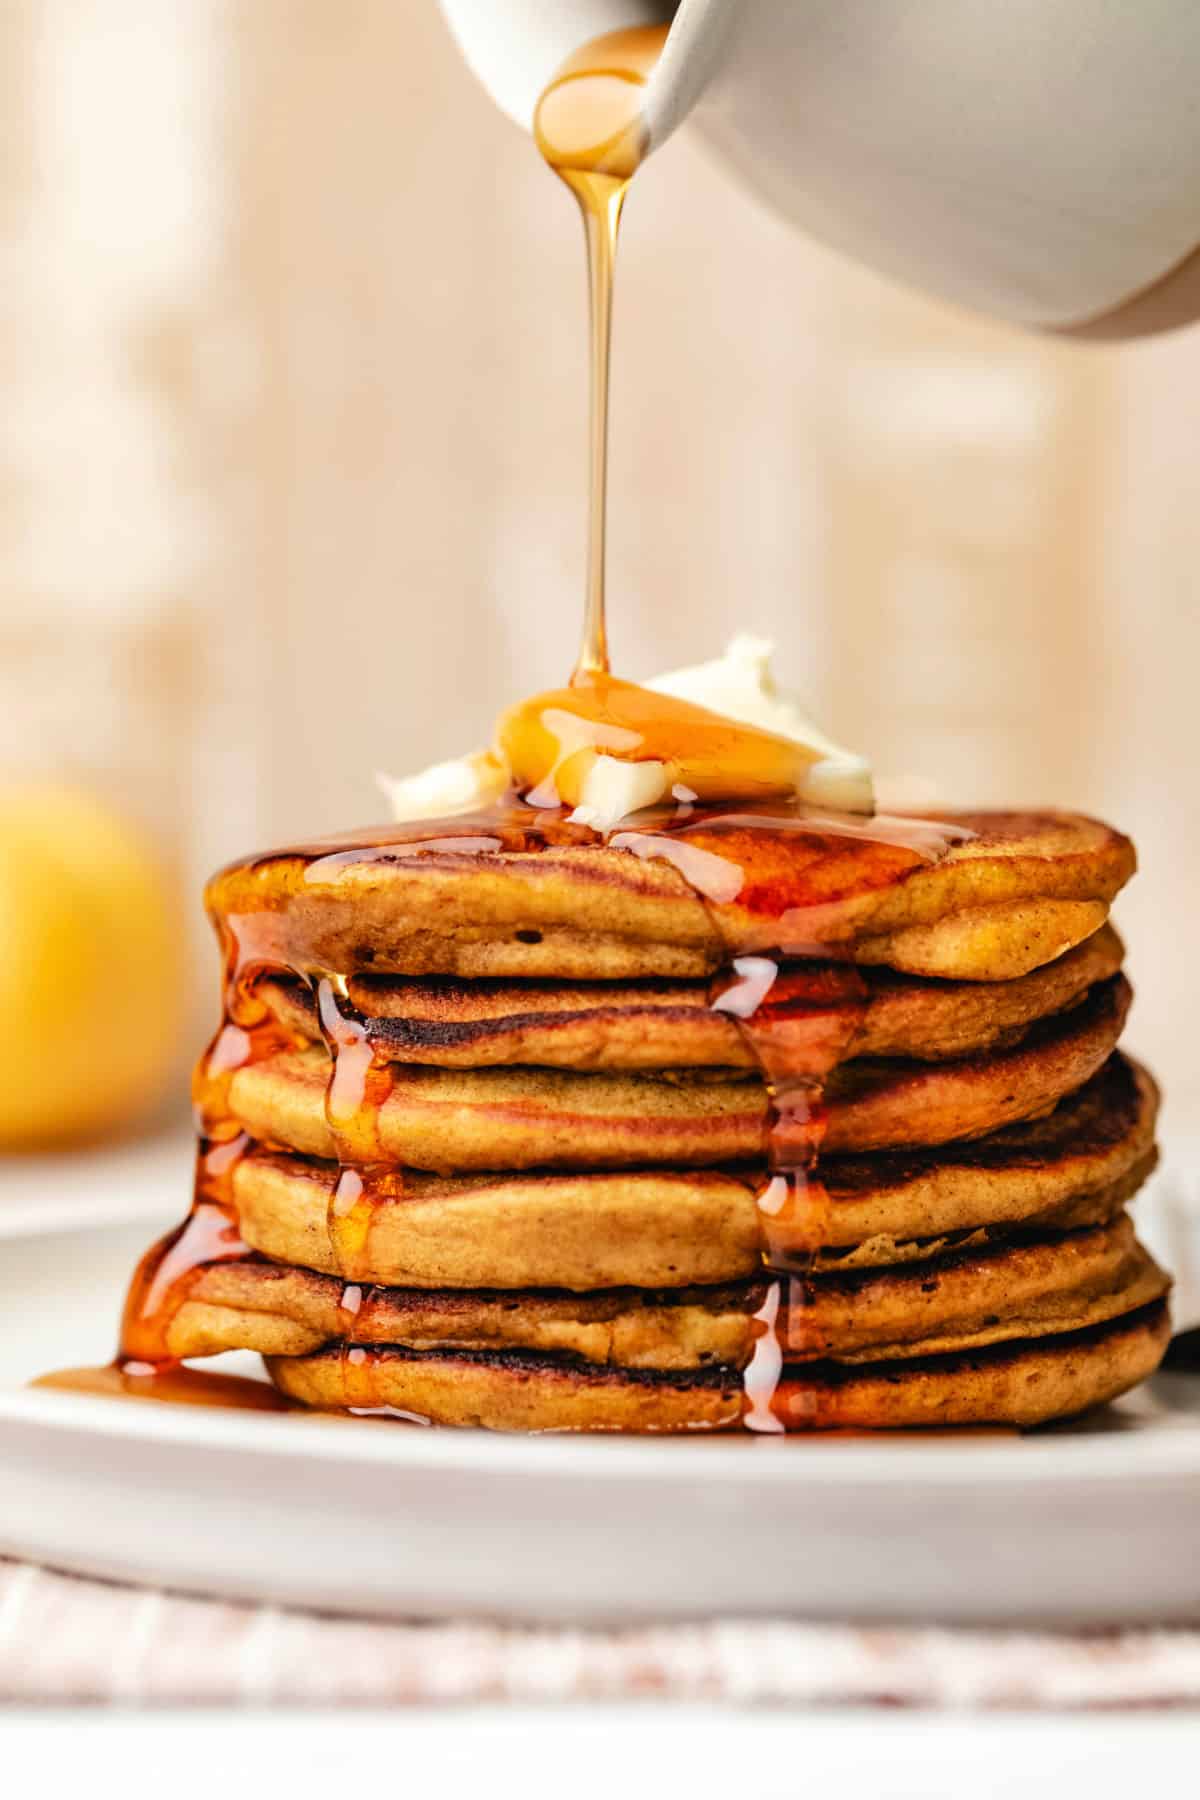 Maple syrup pouring out of a ceramic syrup holder onto a stack of pumpkin pancakes.